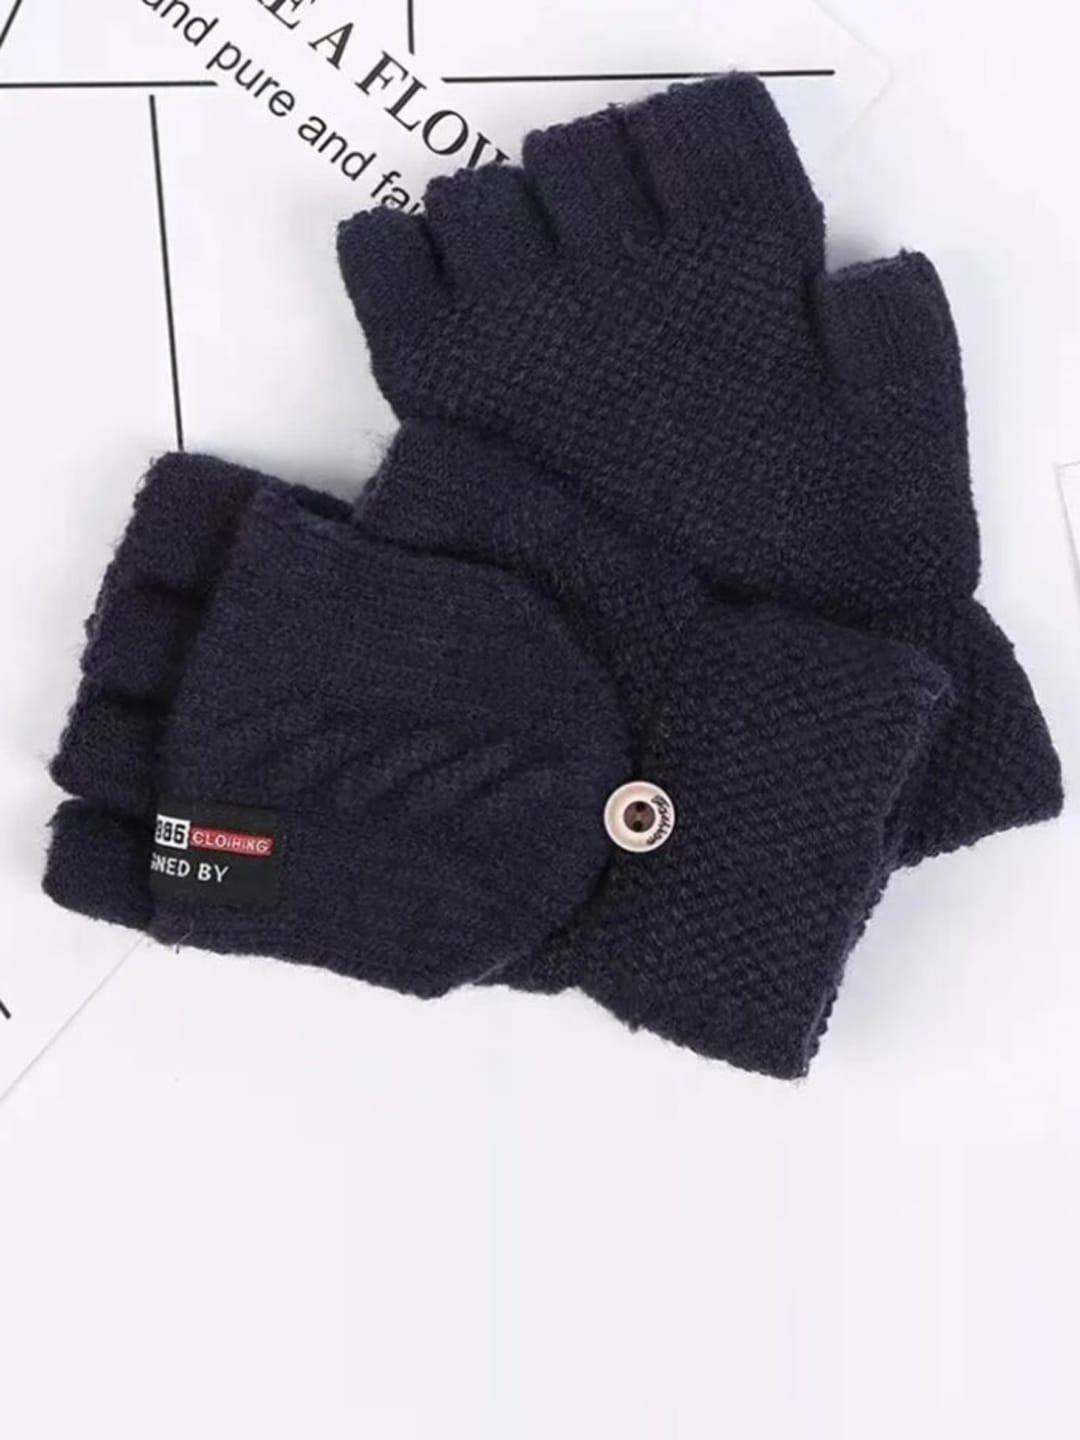 TIPY TIPY TAP Girls Half Finger Woolen Winter Gloves With Attached Hood